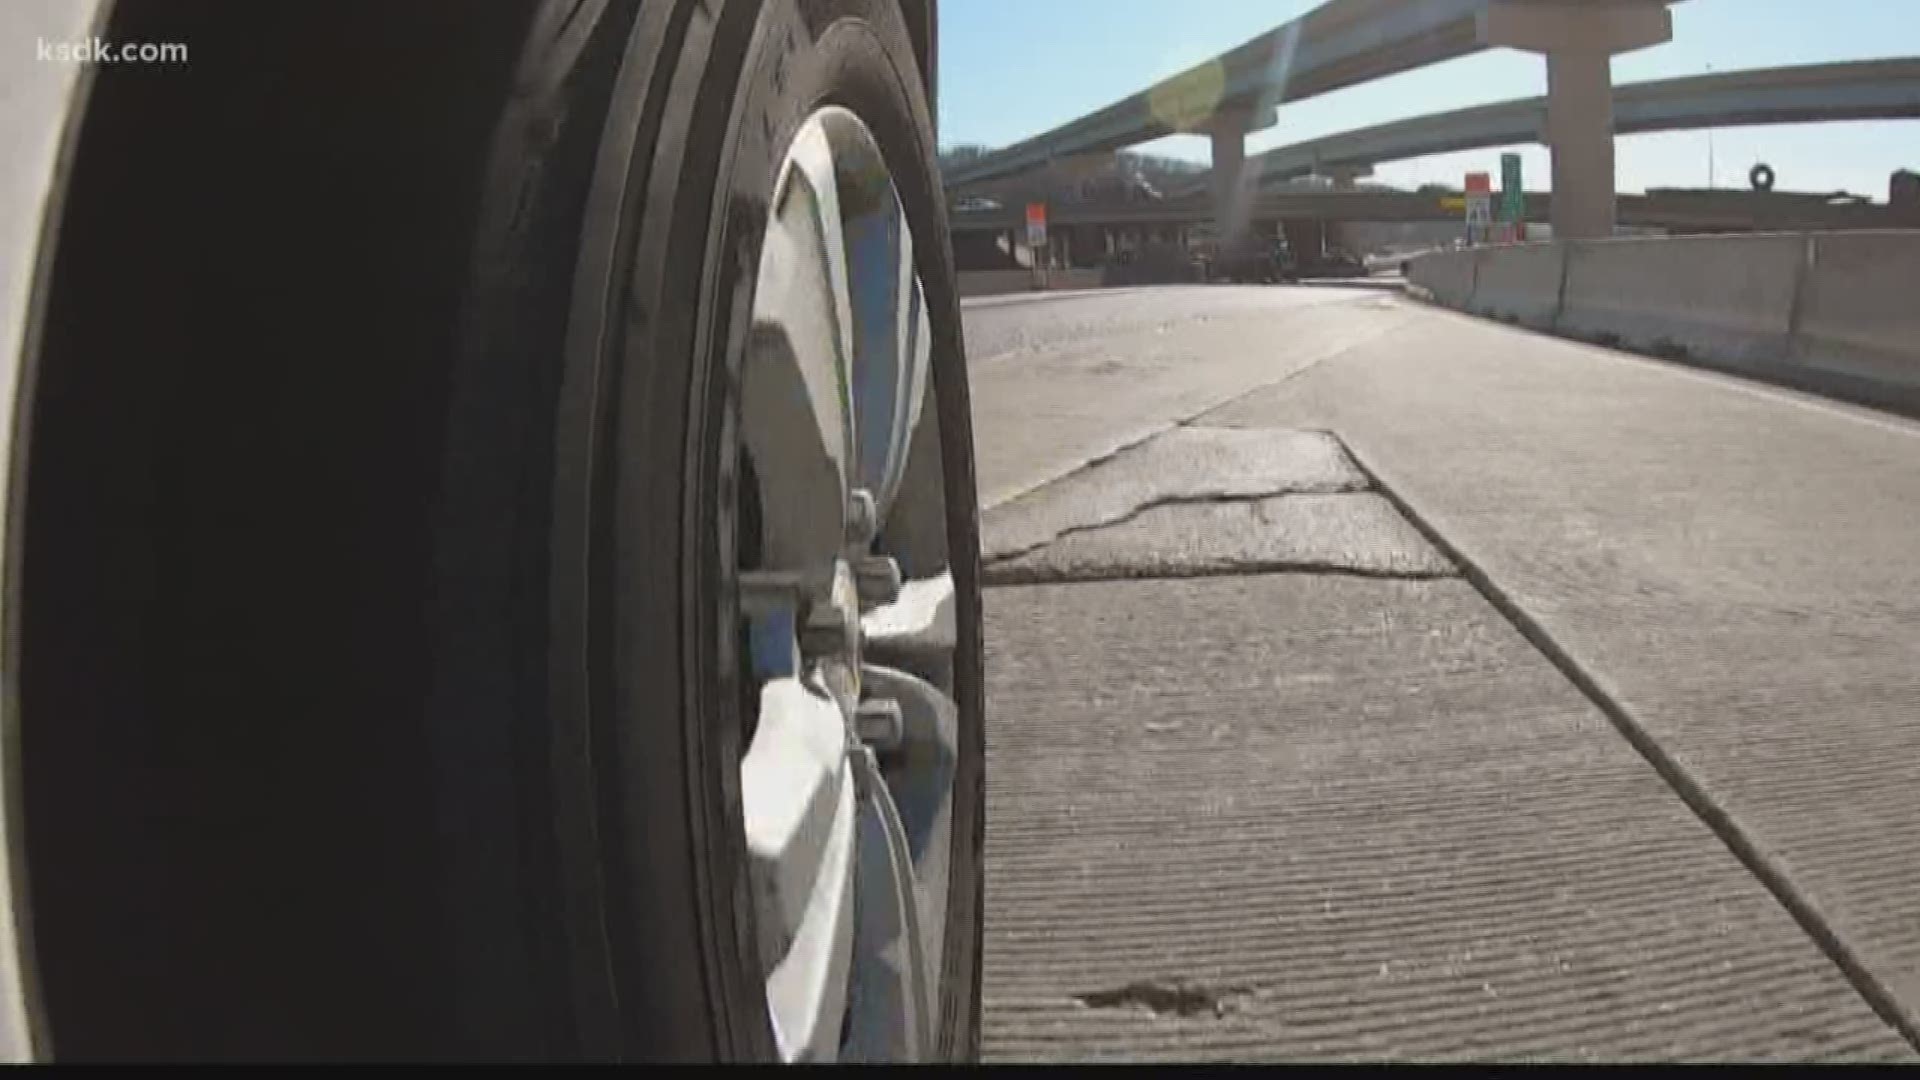 The pothole on a ramp from I-270 to I-44 was so big, one driver said it felt like the crater was a foot deep.